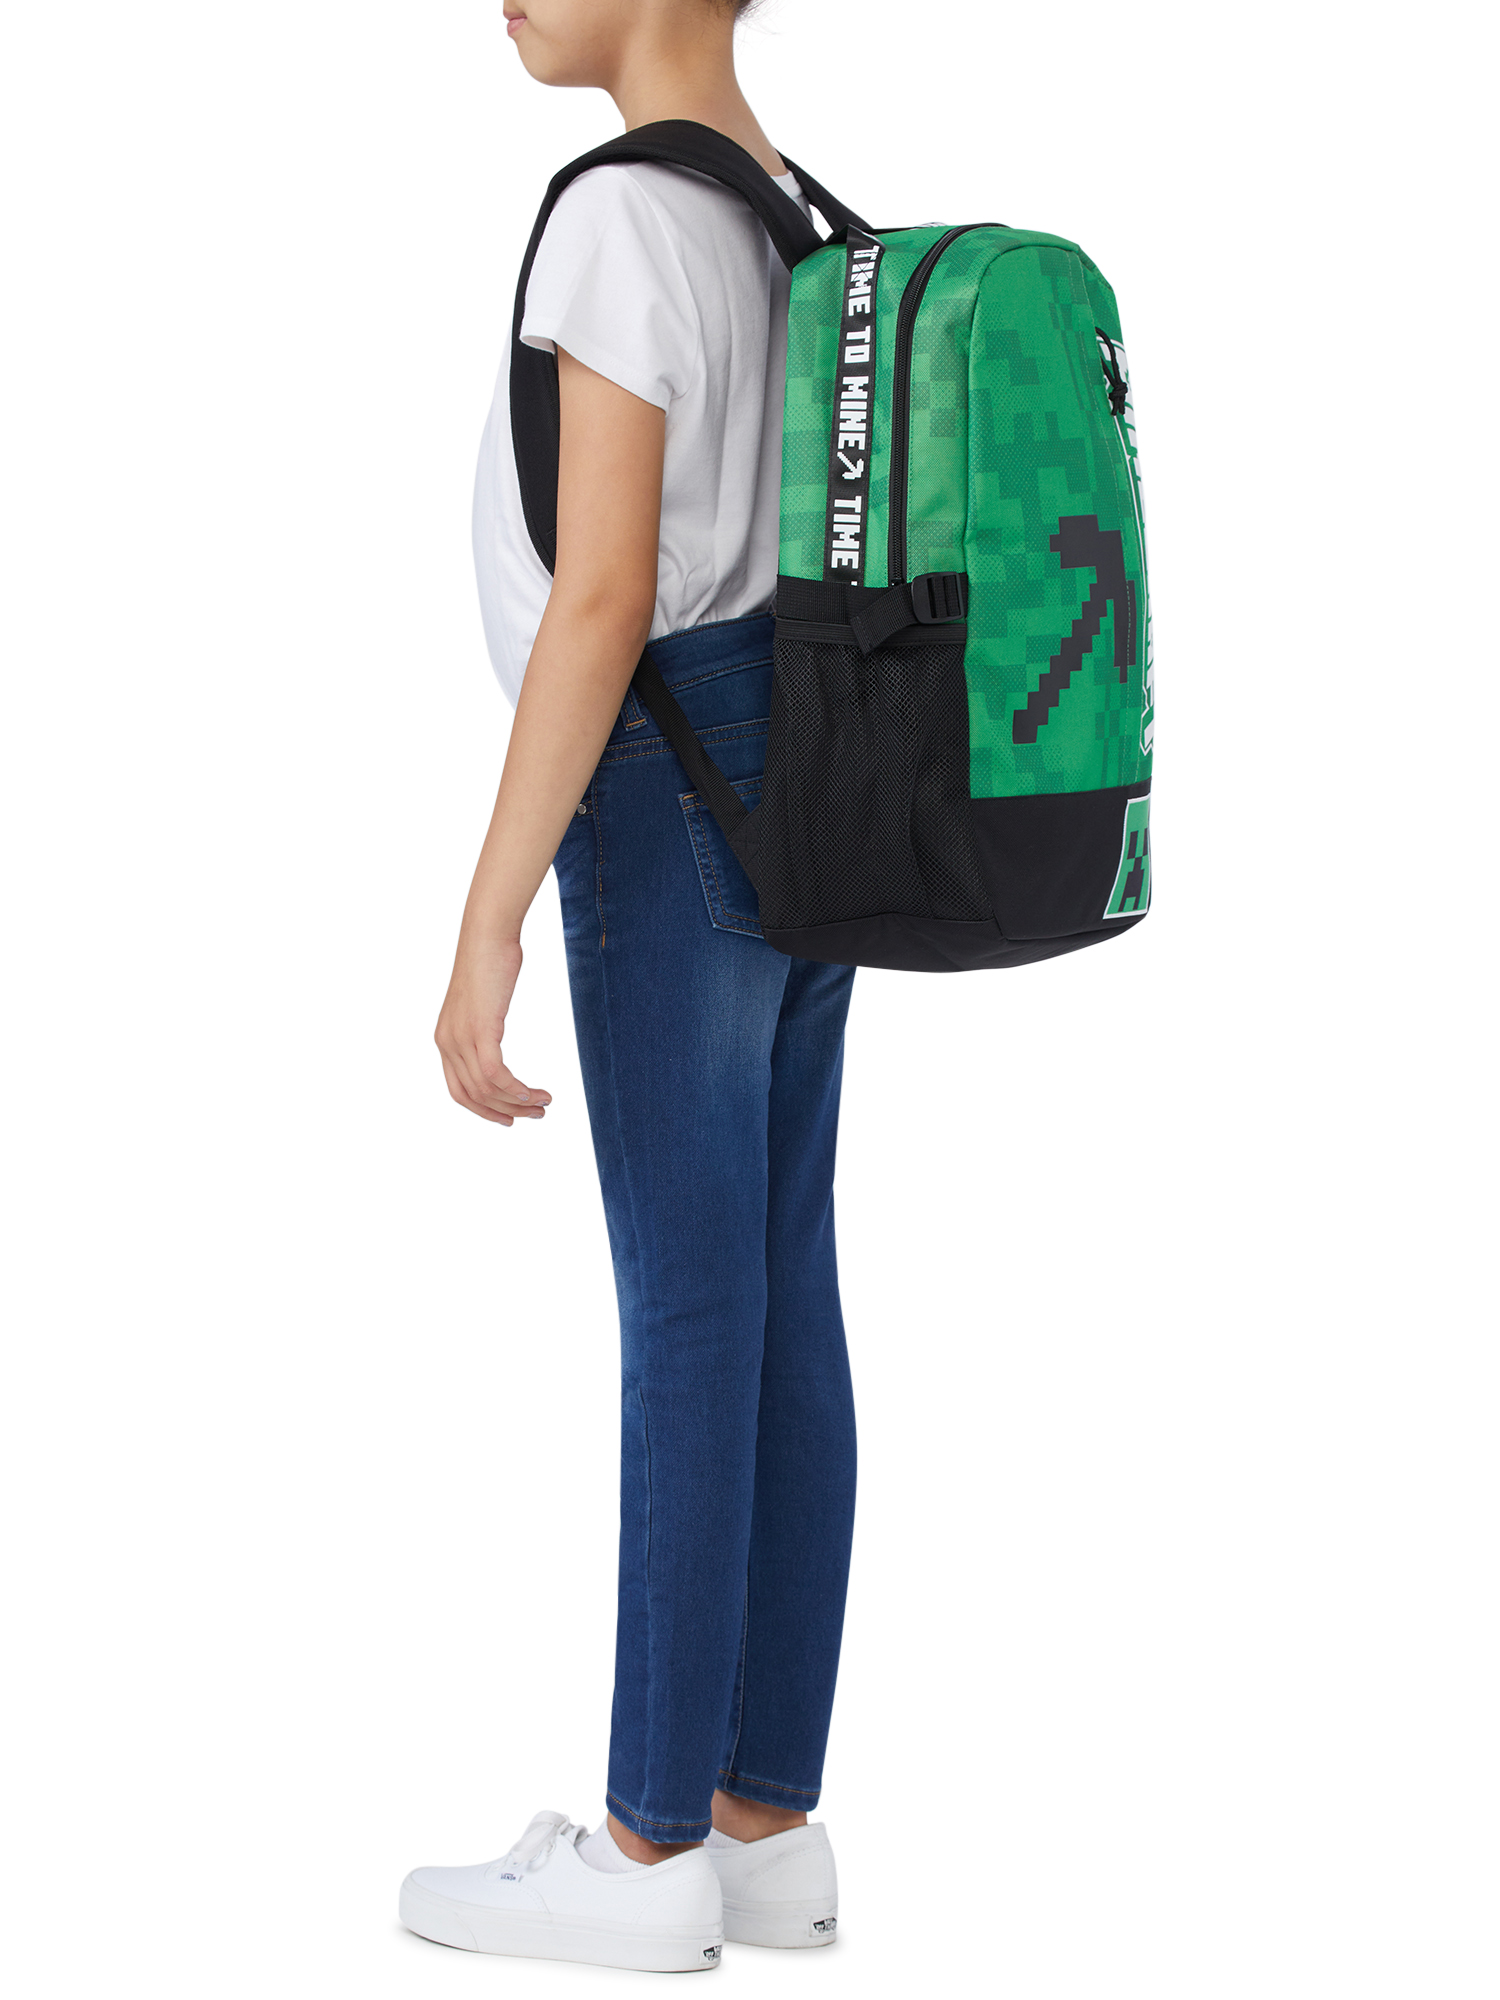 Minecraft Pickaxe Creeper Unisex 18" Laptop Backpack, Green Black - image 5 of 5